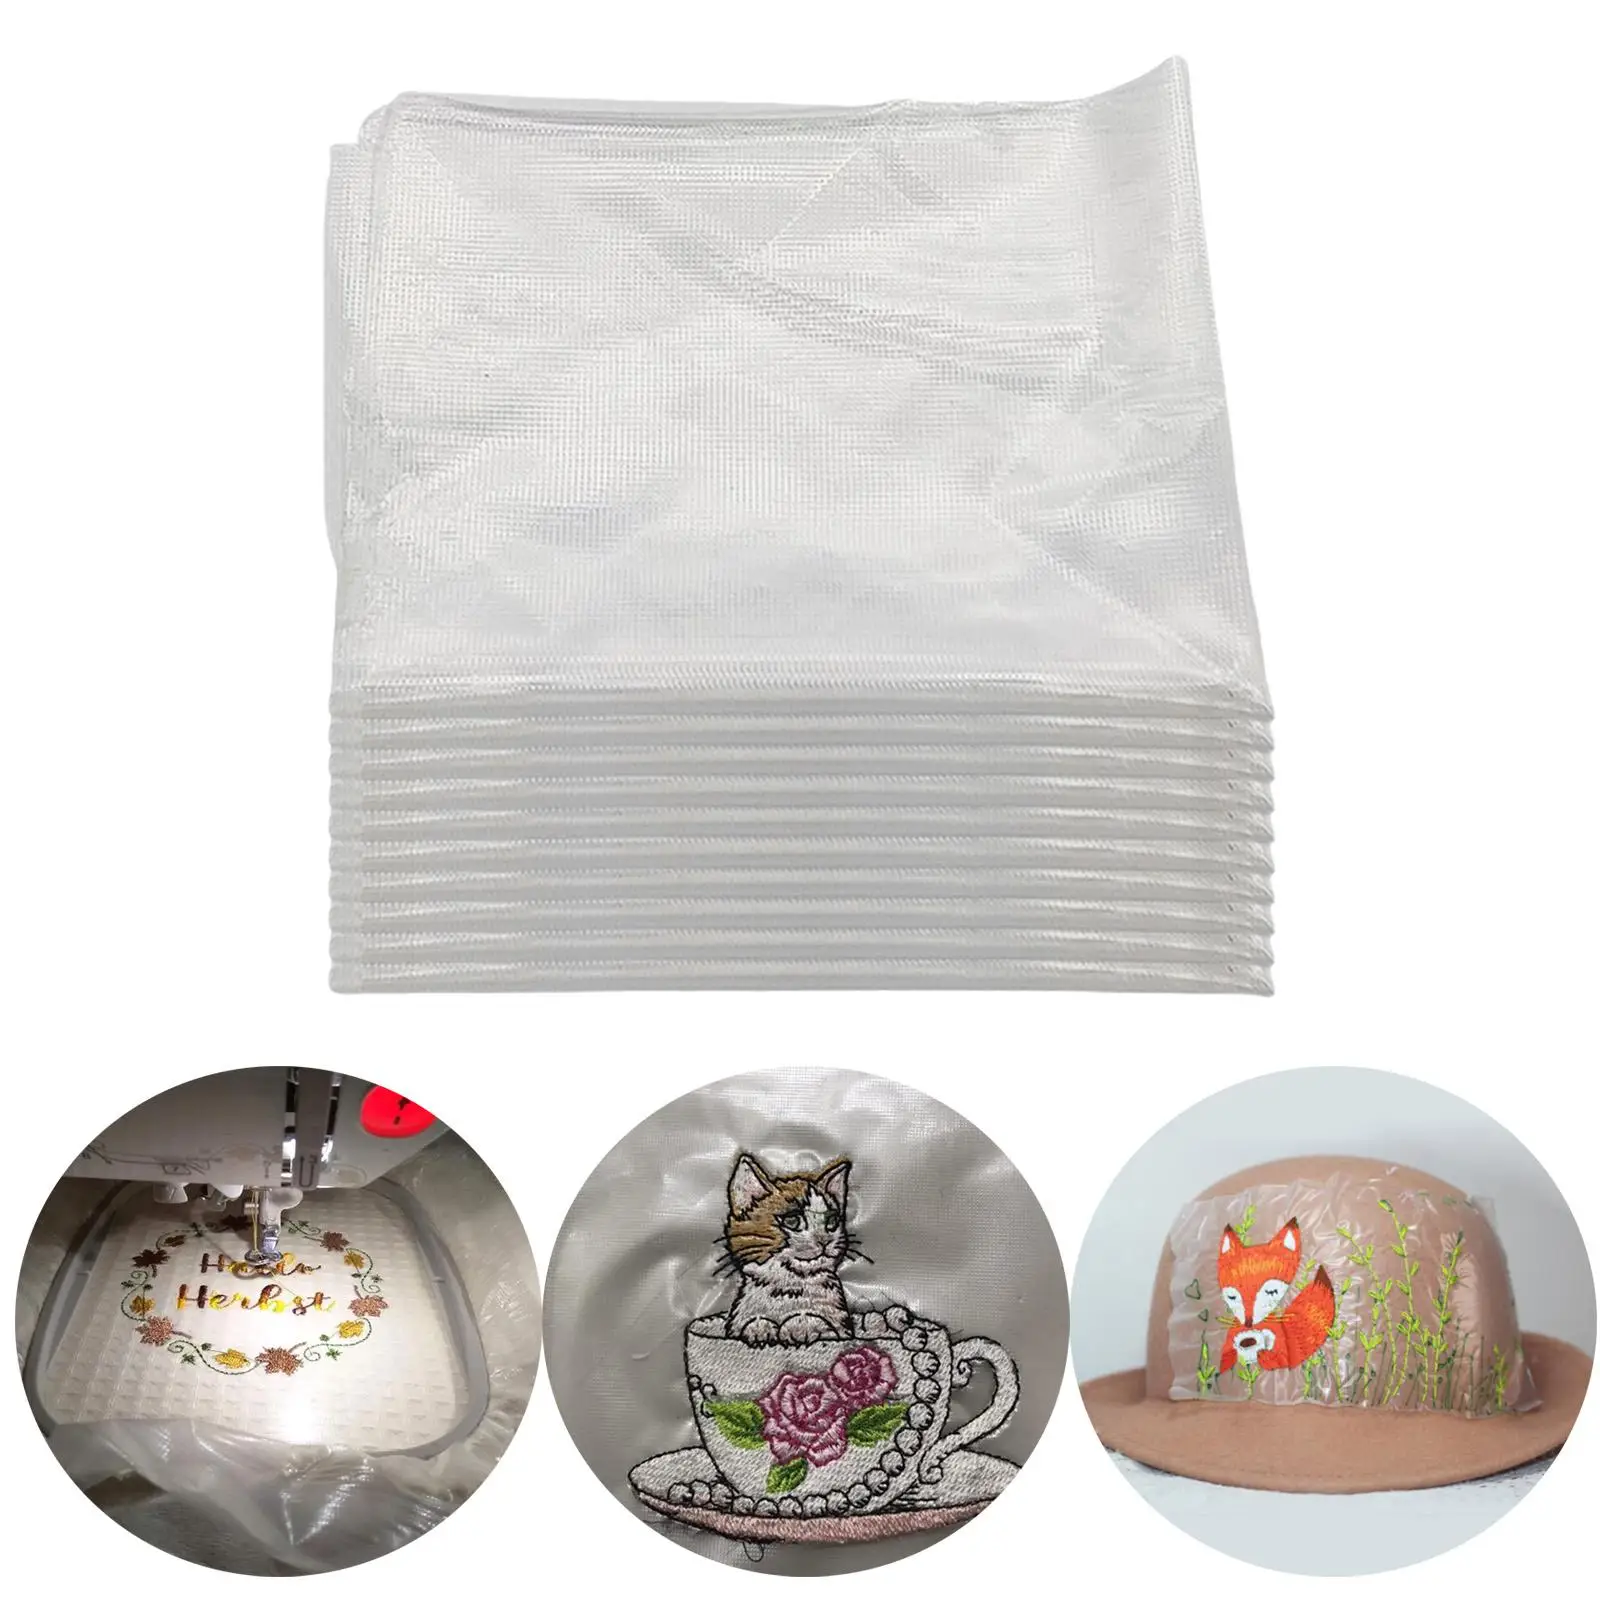 Water Soluble Embroidery Stabilizer Dissolvable Paper Sewing for Sheets